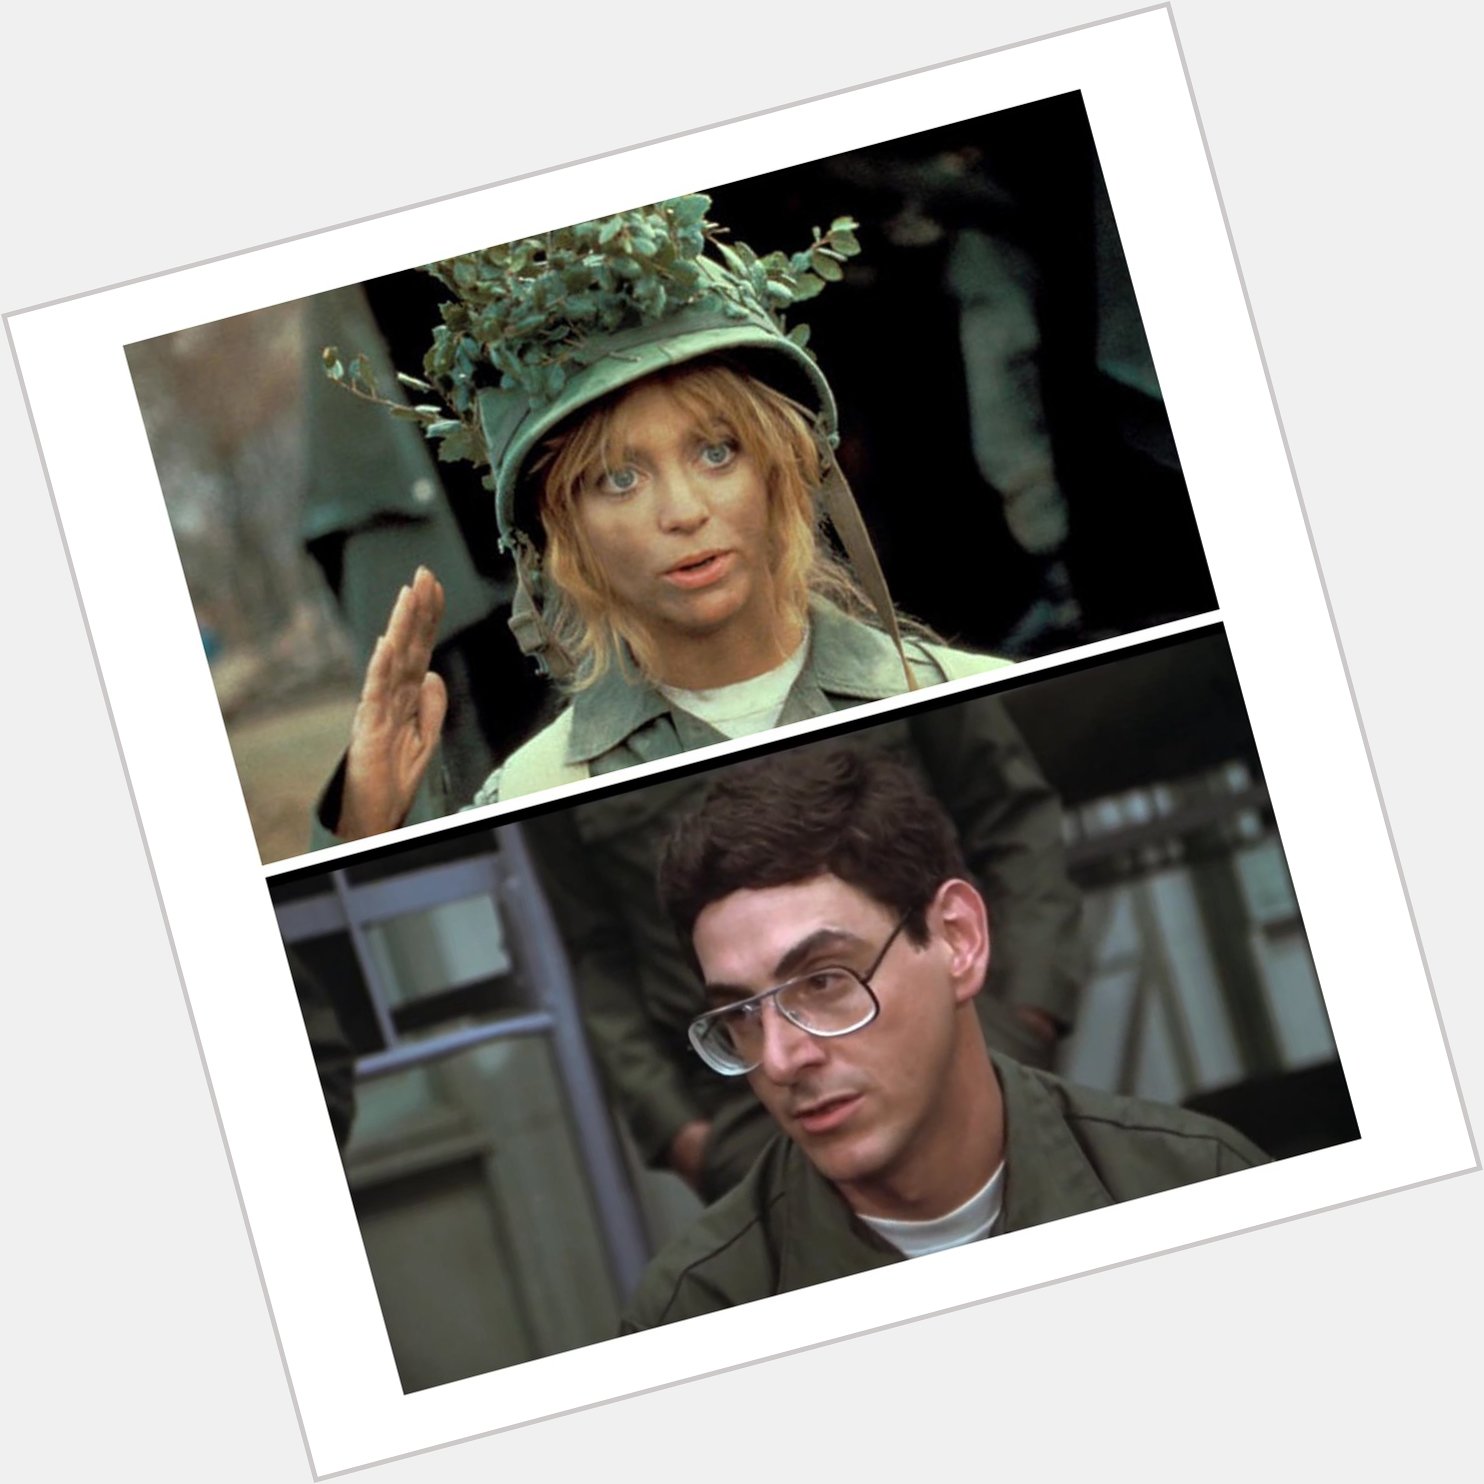 Happy Birthday to 

Goldie Hawn
The late great Harold Ramis 